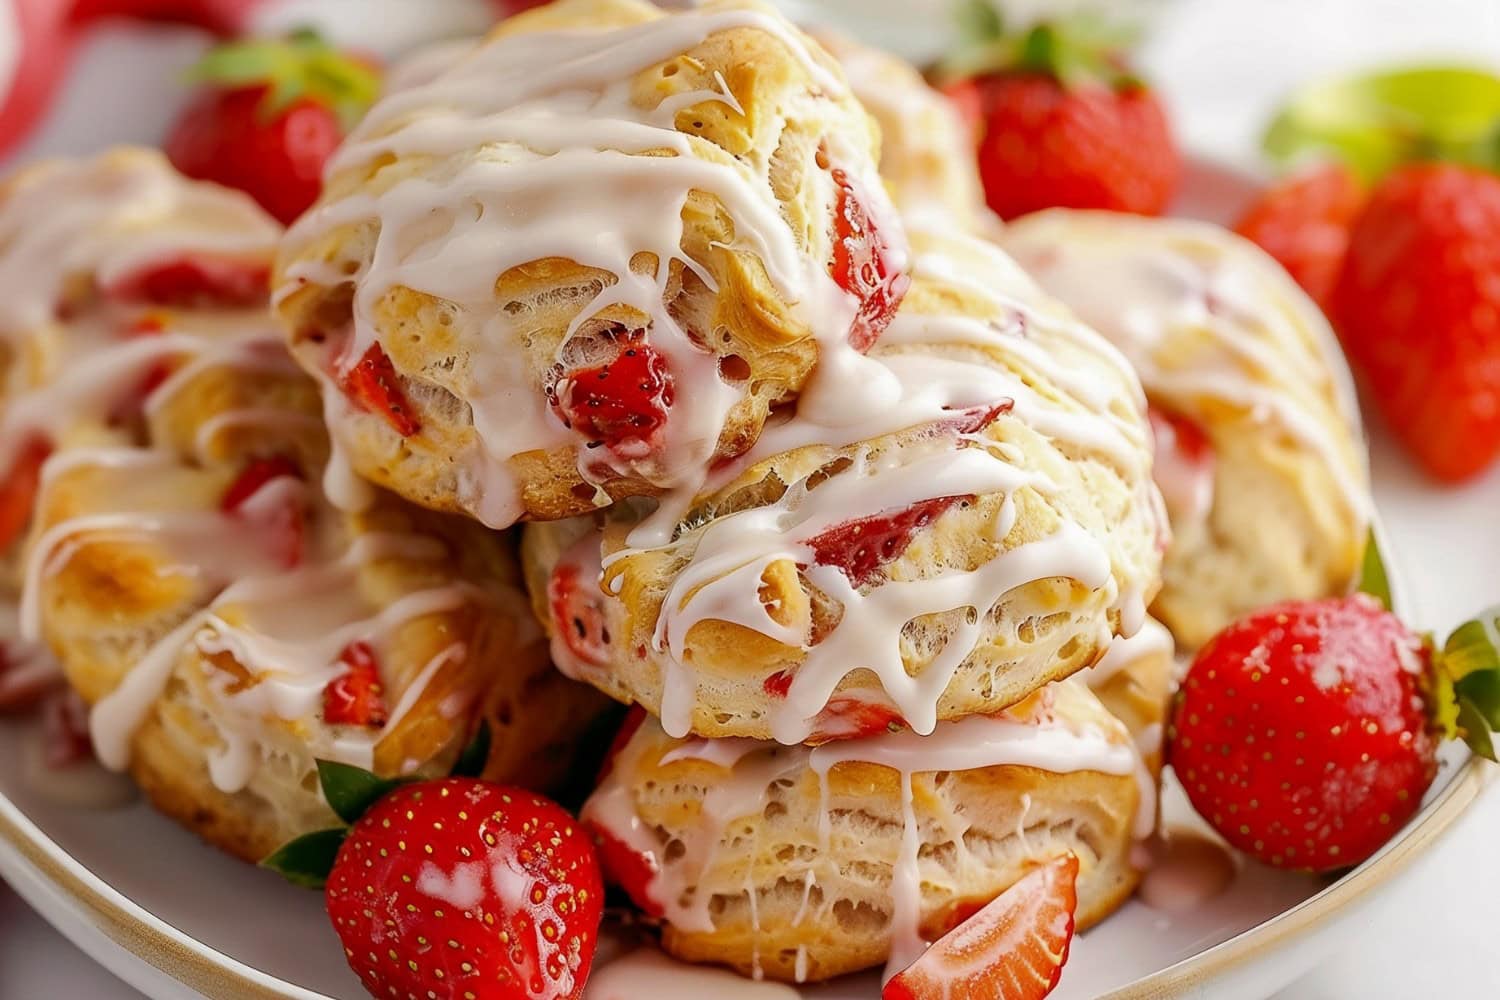 Strawberry Biscuits